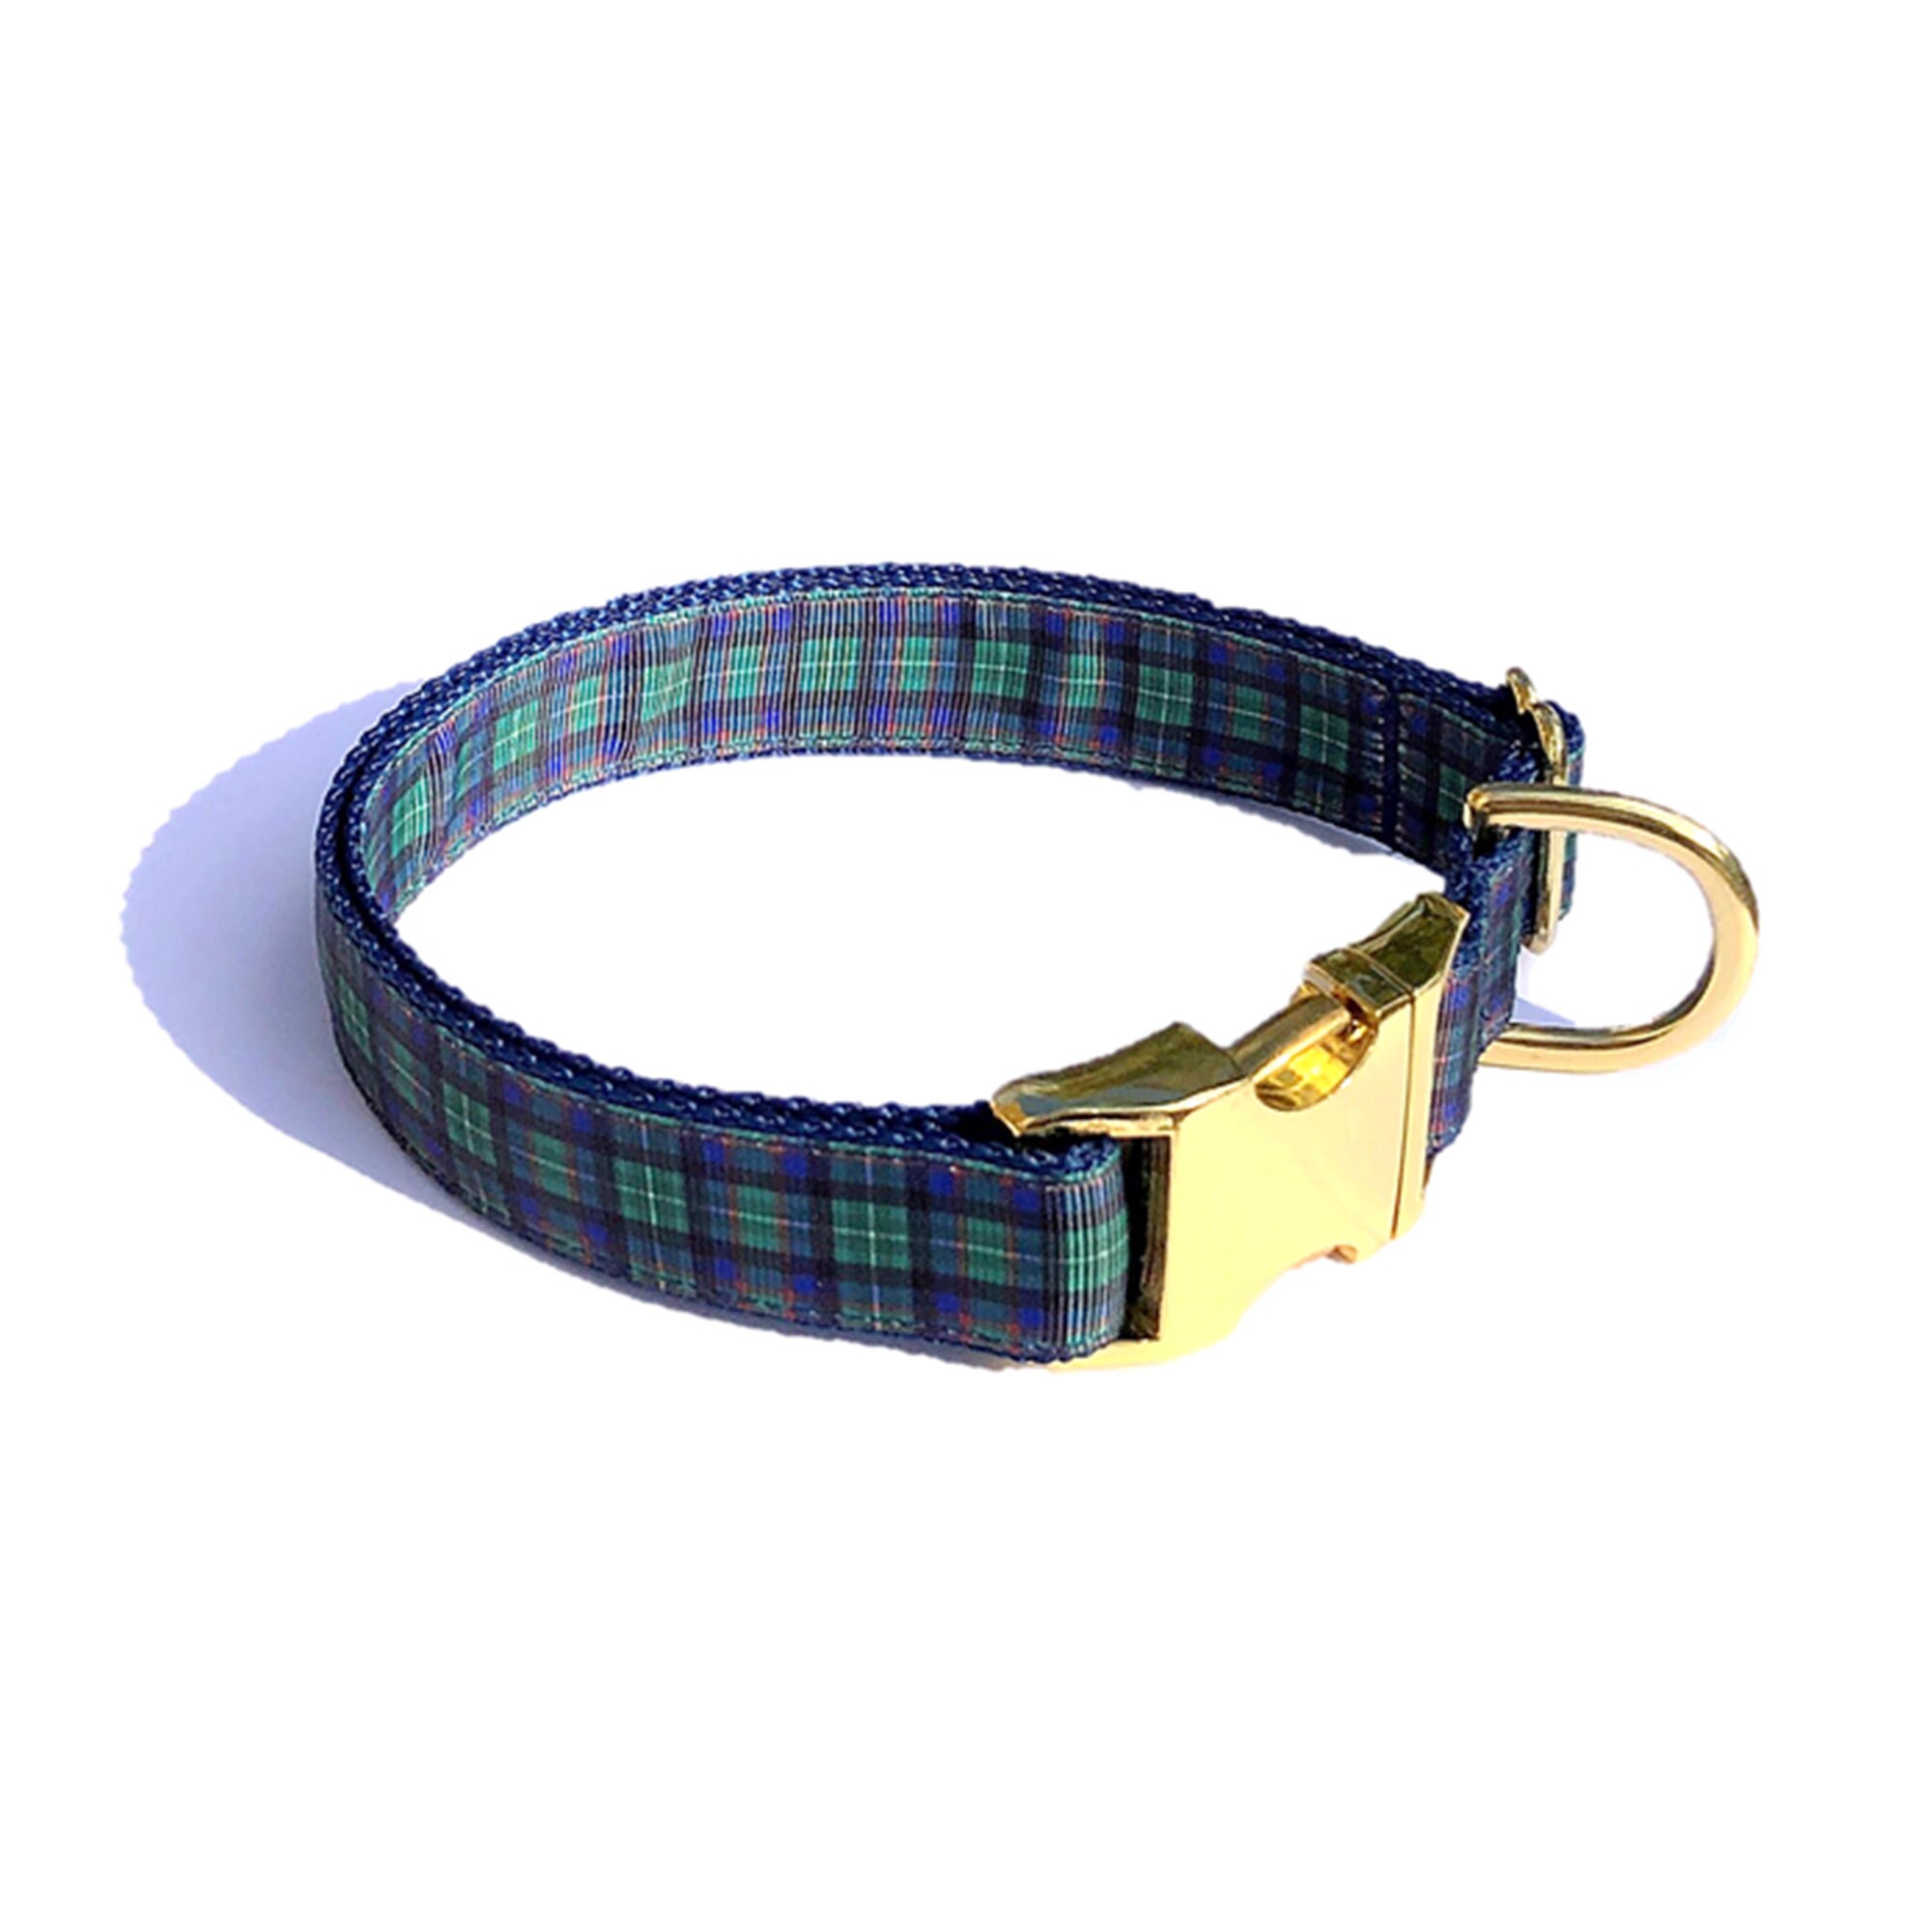  Kate Spade New York Cute Dog Collar, Gold Metal Buckle Dog  Collar, 11.5 to 15 Adjustable Dog Collar for Female or Male Dogs, Stylish  Dog Collar for Small and Medium